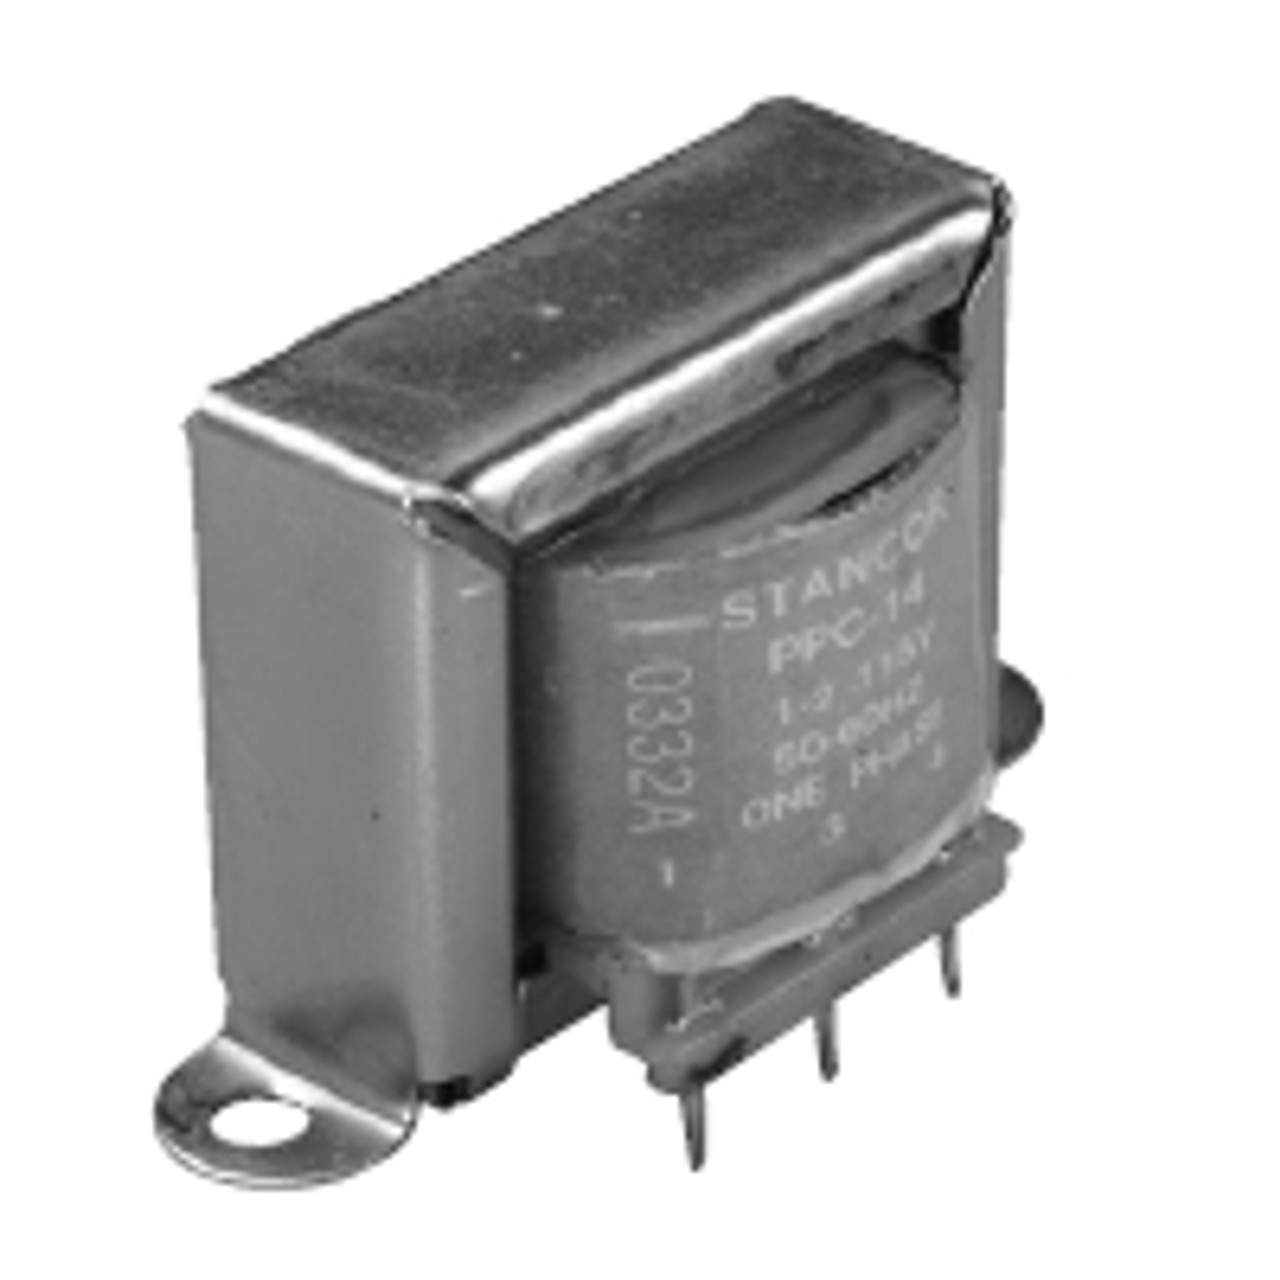 Stancor / White Rodgers PPC-14 Printed Circuit Transformers